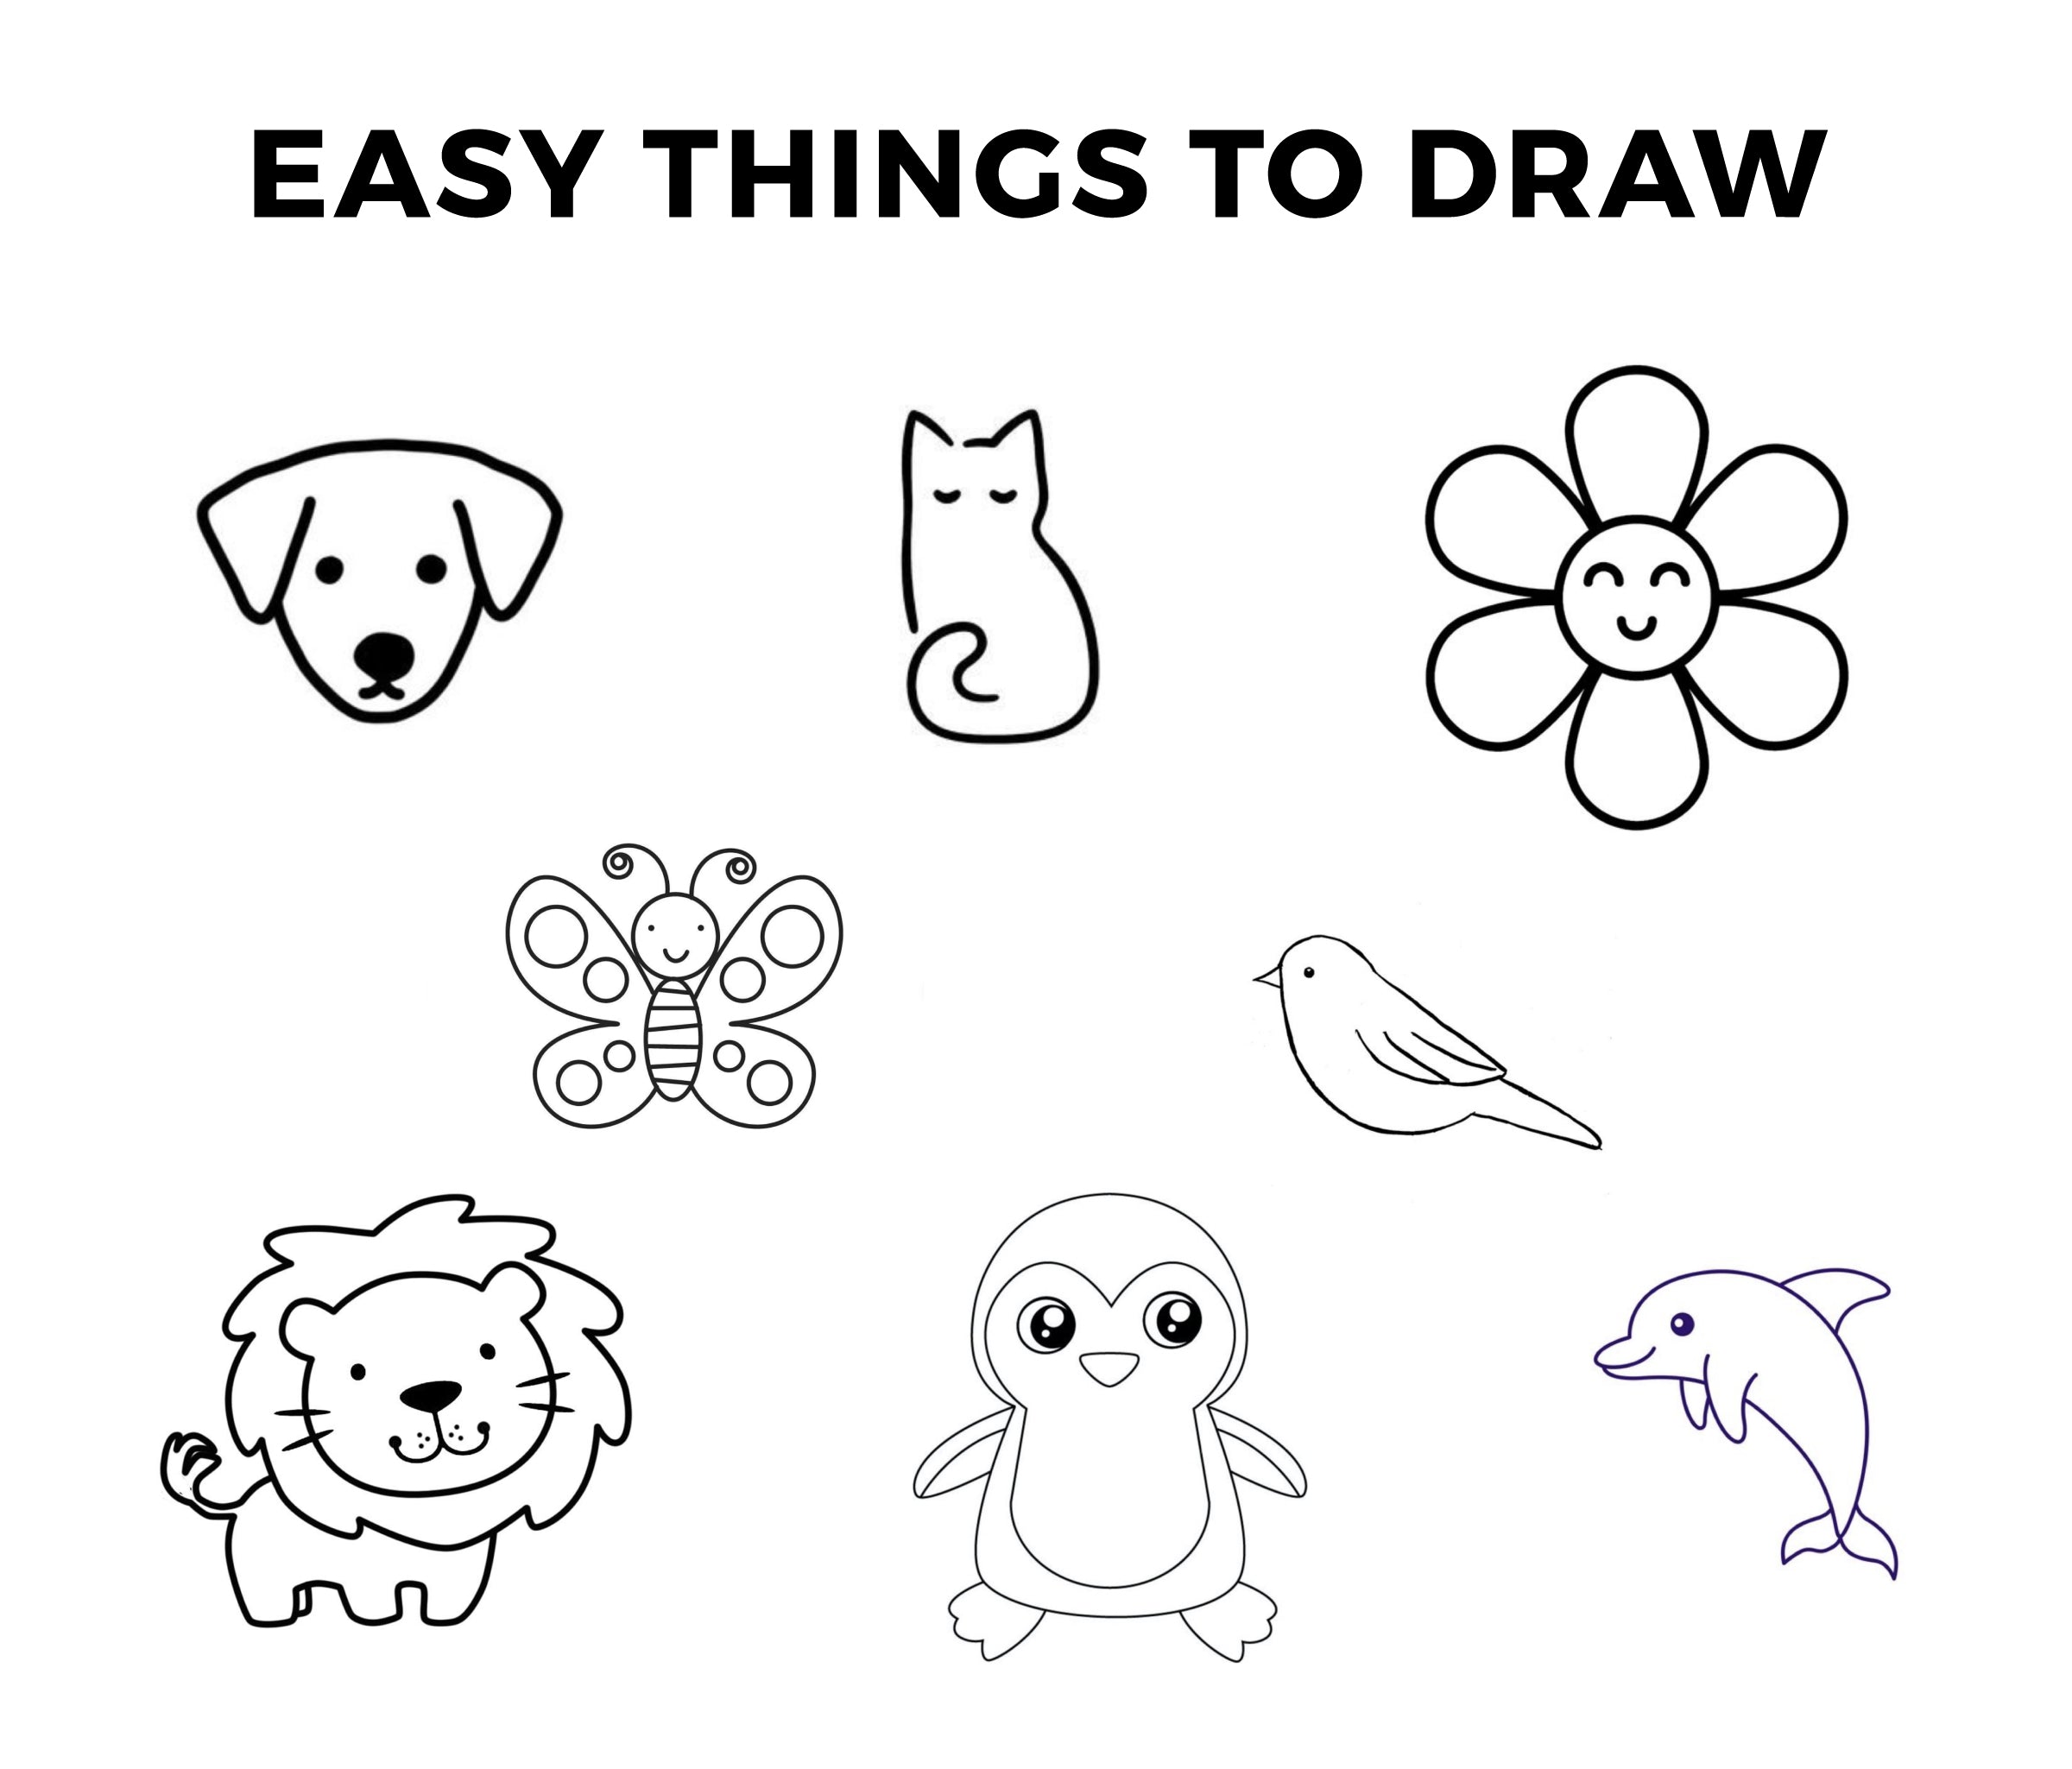 How to Draw Funny Things: Easy and Simple Drawing Book with Step-by-Step  Instructions, Perfect for Gifting Children and Beginners on Christmas and  Birthdays (My First Drawing Book for Kids): Made Easy Press,